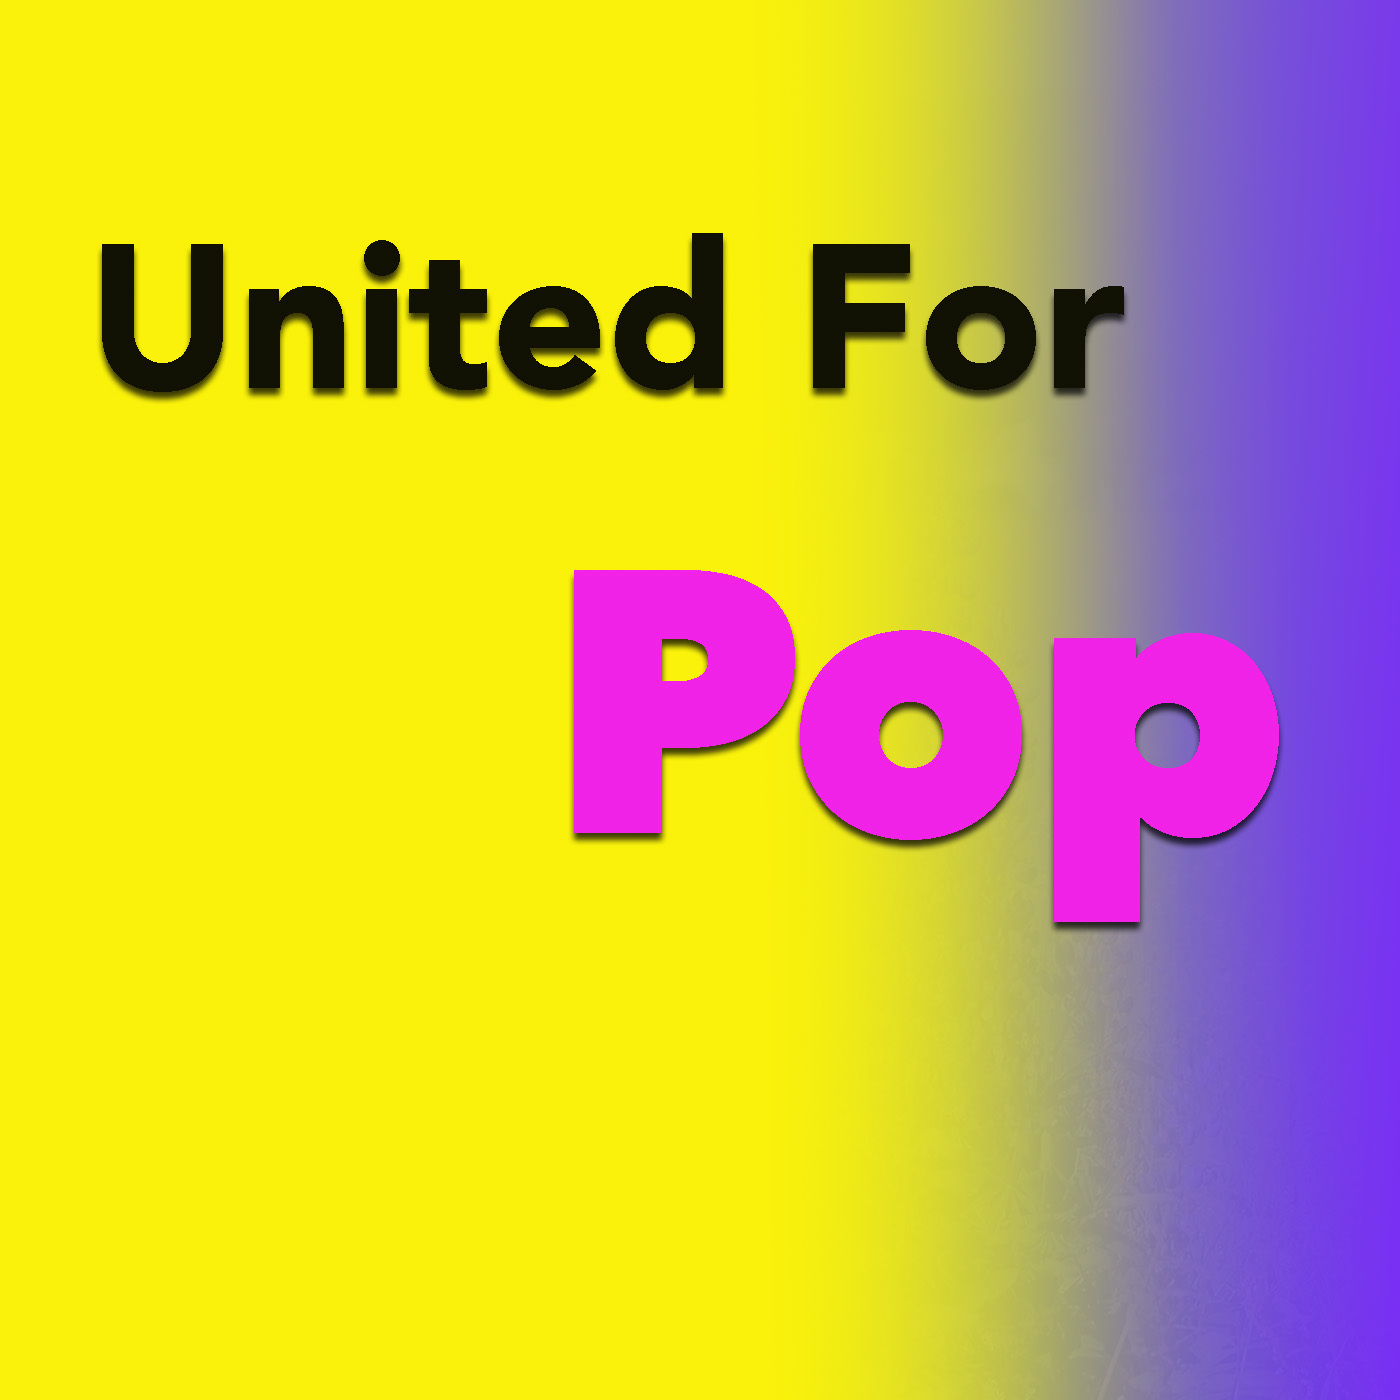 United For Pop